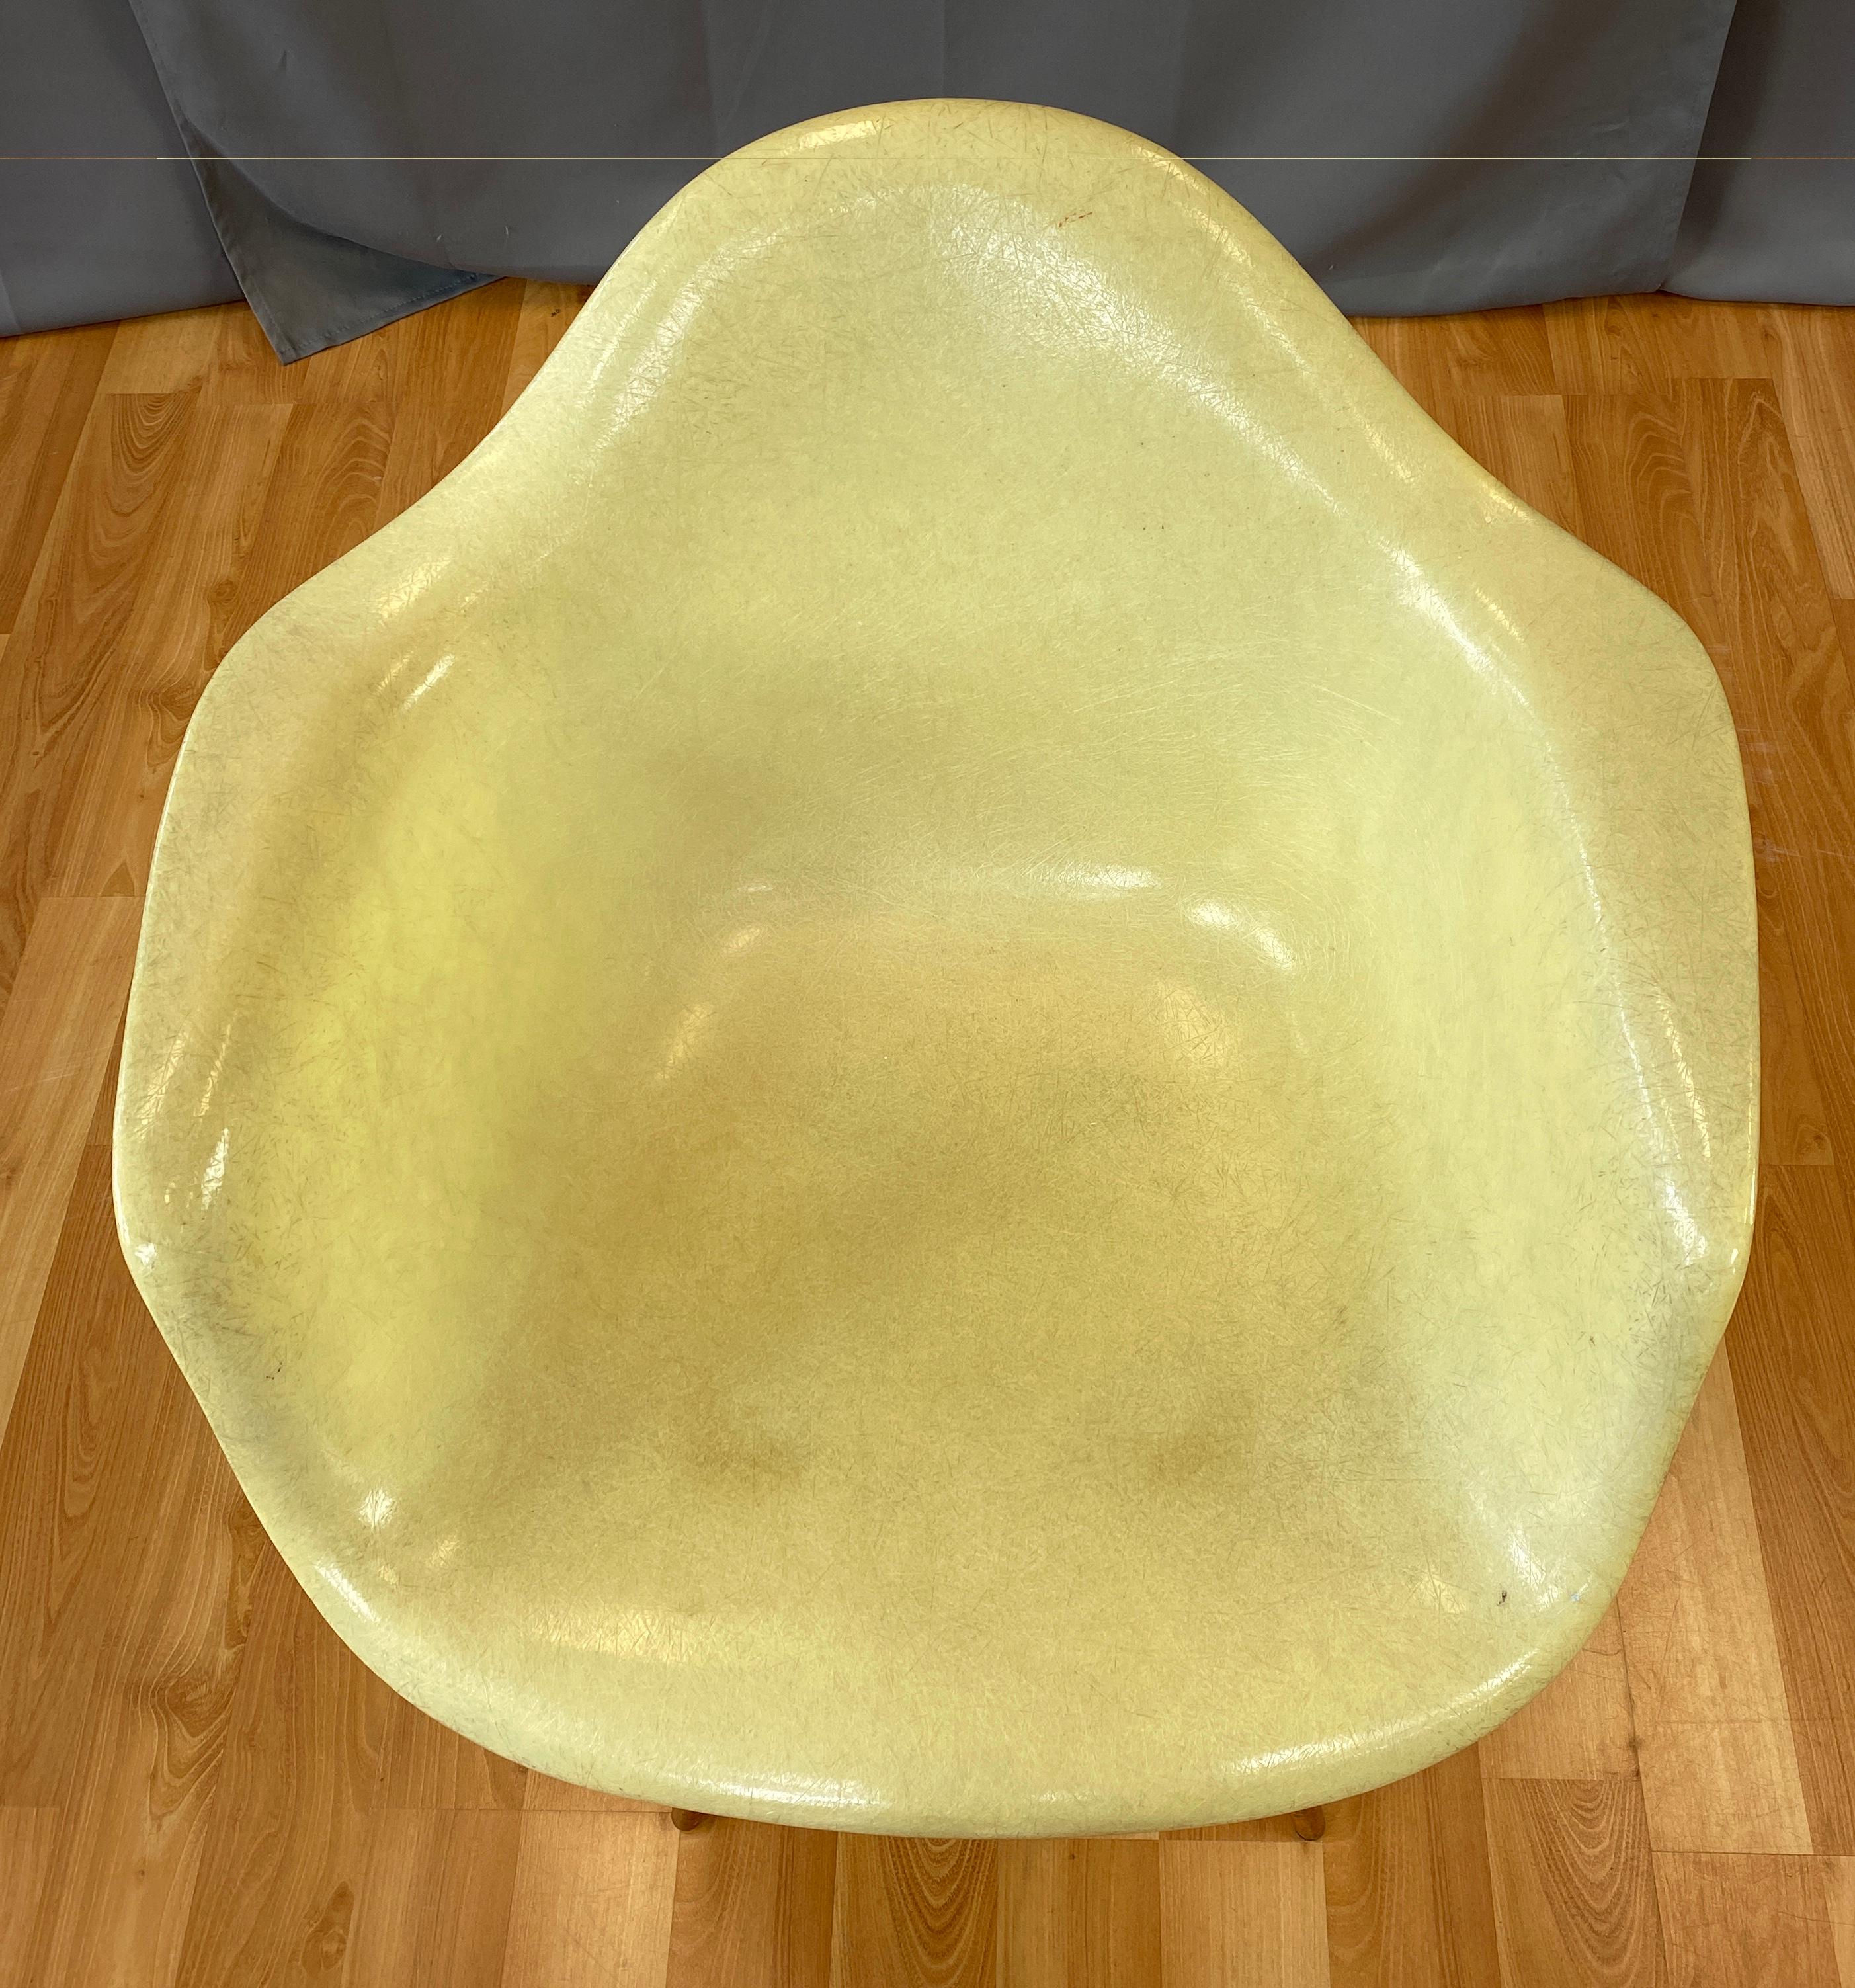 1st Edition Zenith Plastics Rope Edge Paw Chair Charles Eames for Herman Miller 1